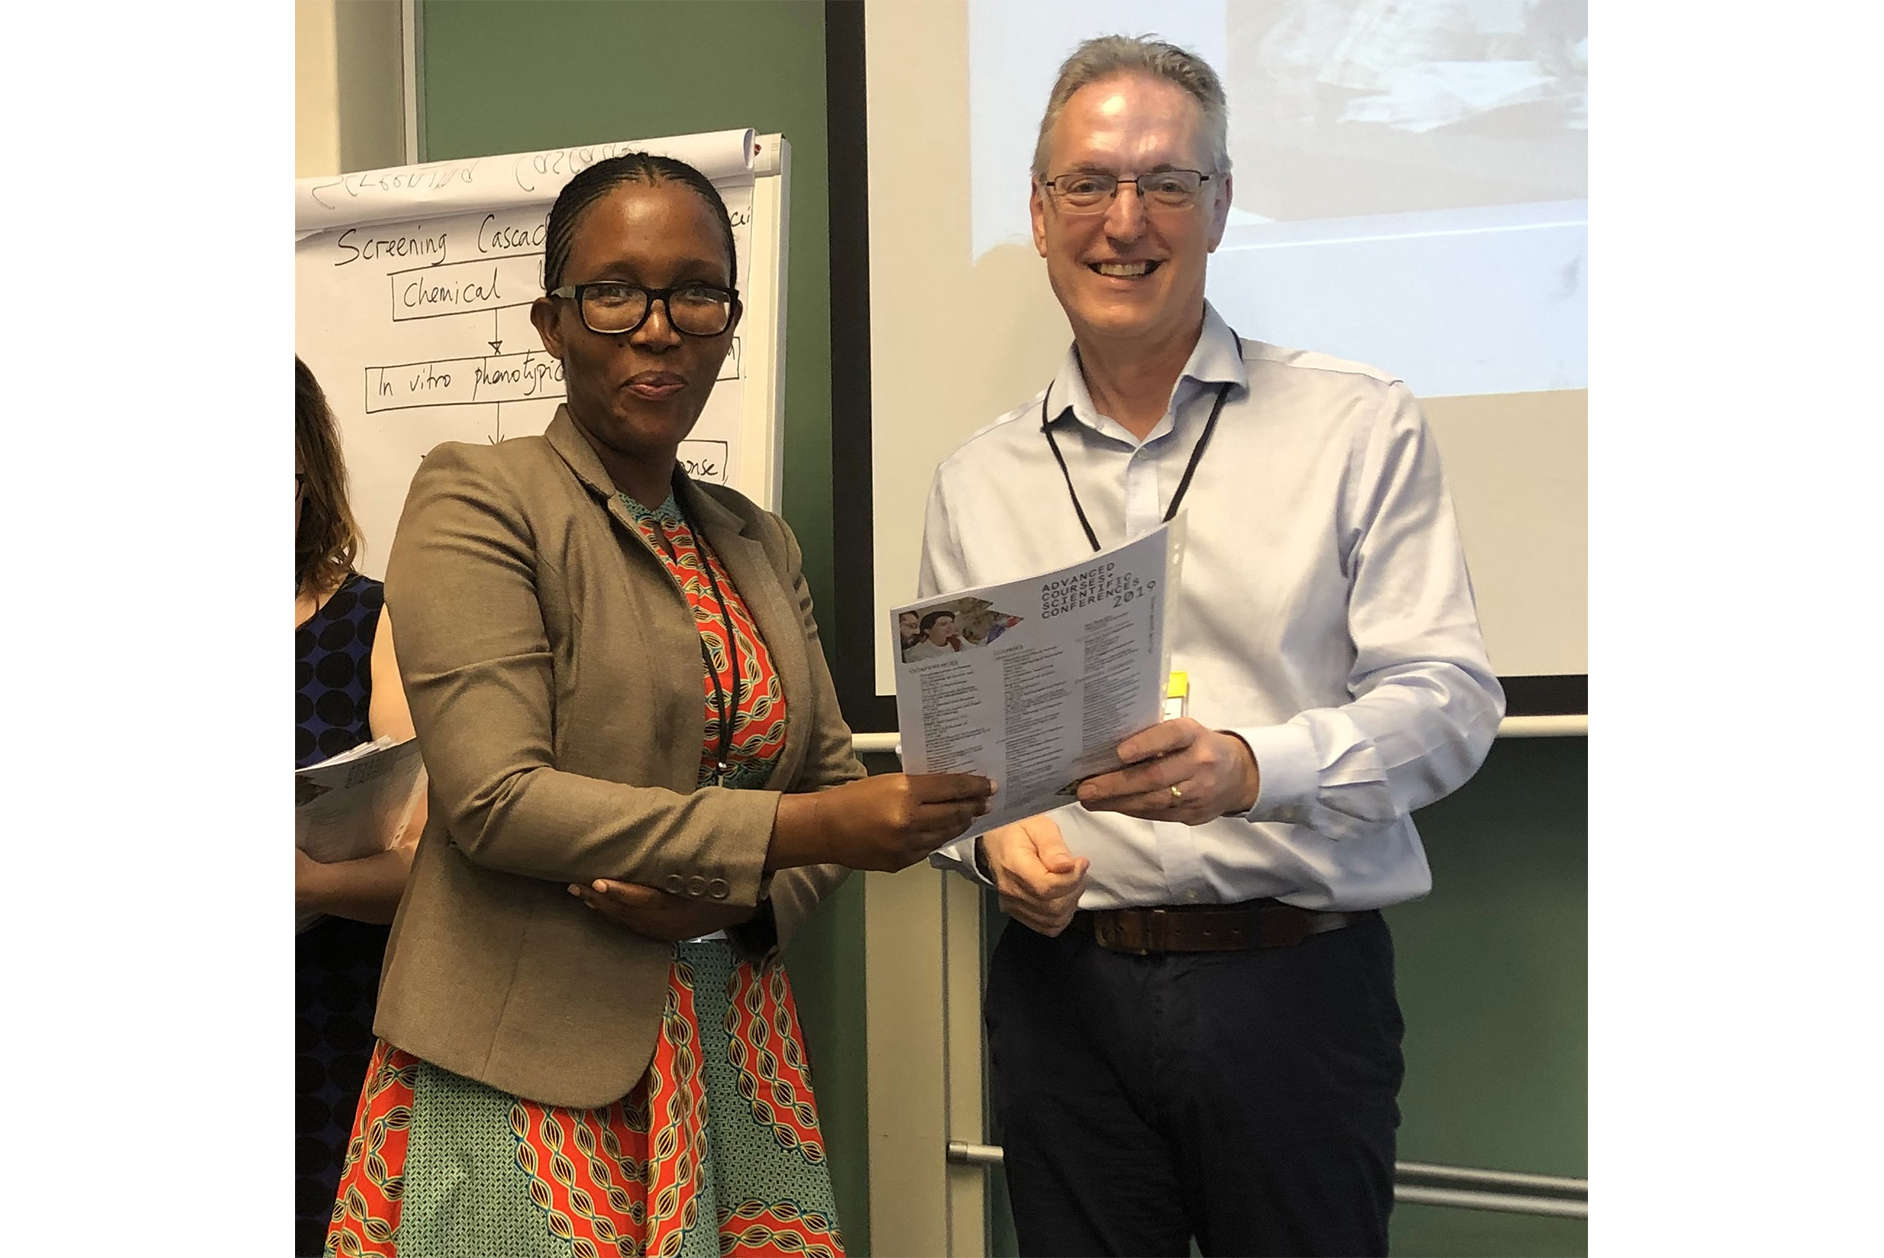 Certificate ceremony at ACSC's Drug Discovery course, Cape Town